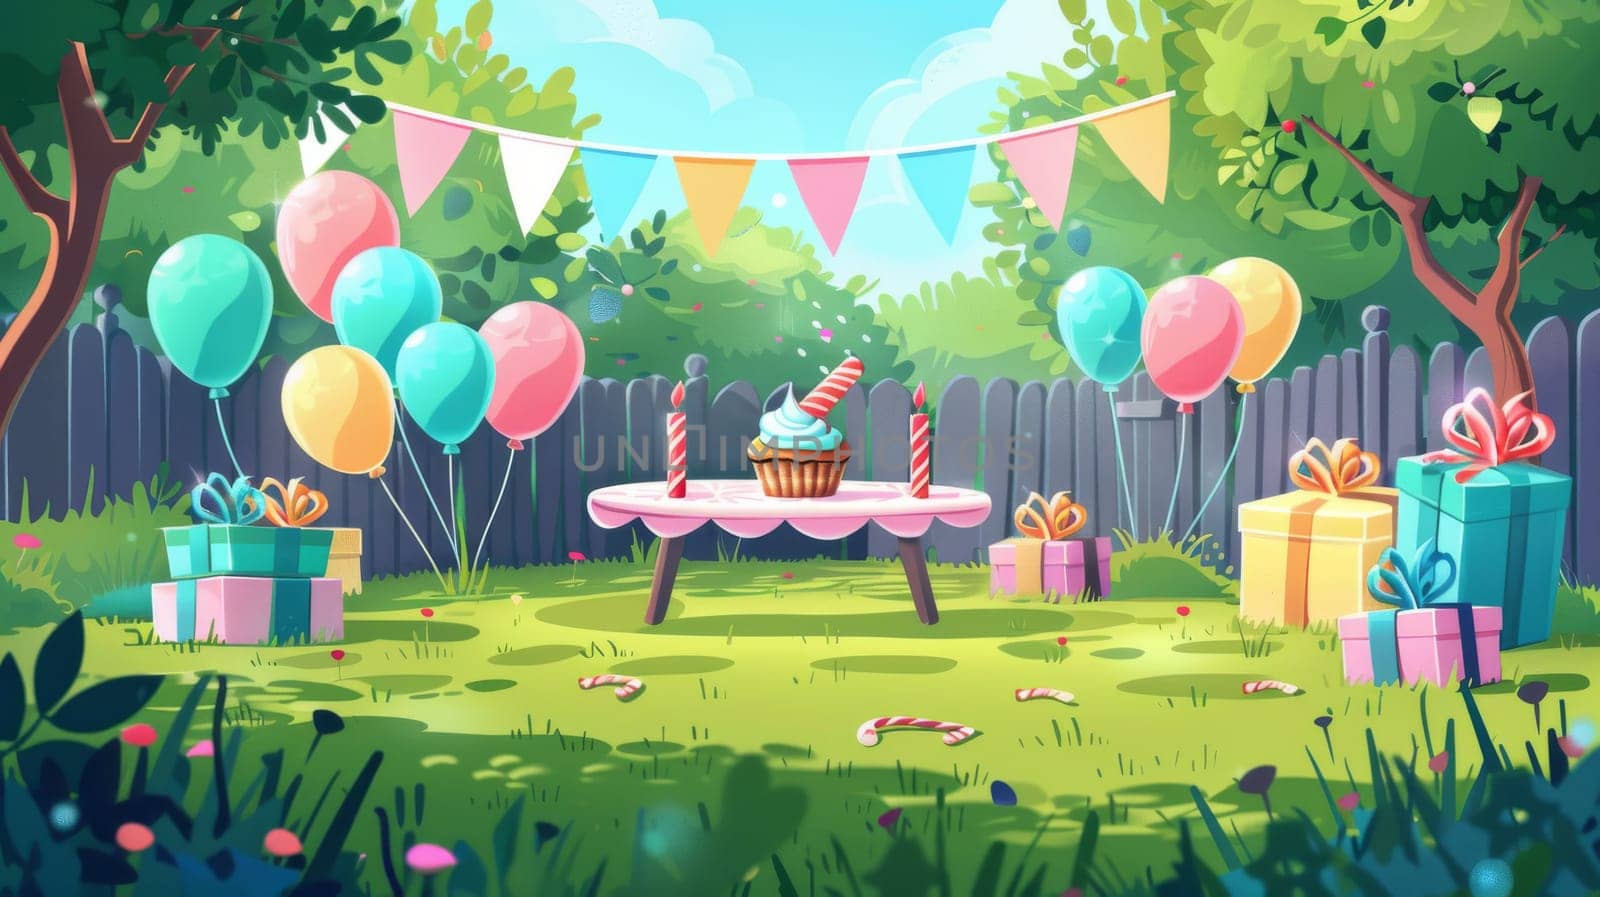 Party decorations on the lawn. Flags, balloons, table and chairs for celebrating kids' anniversaries. Modern illustration of a garden with a holiday cupcake and gift boxes.